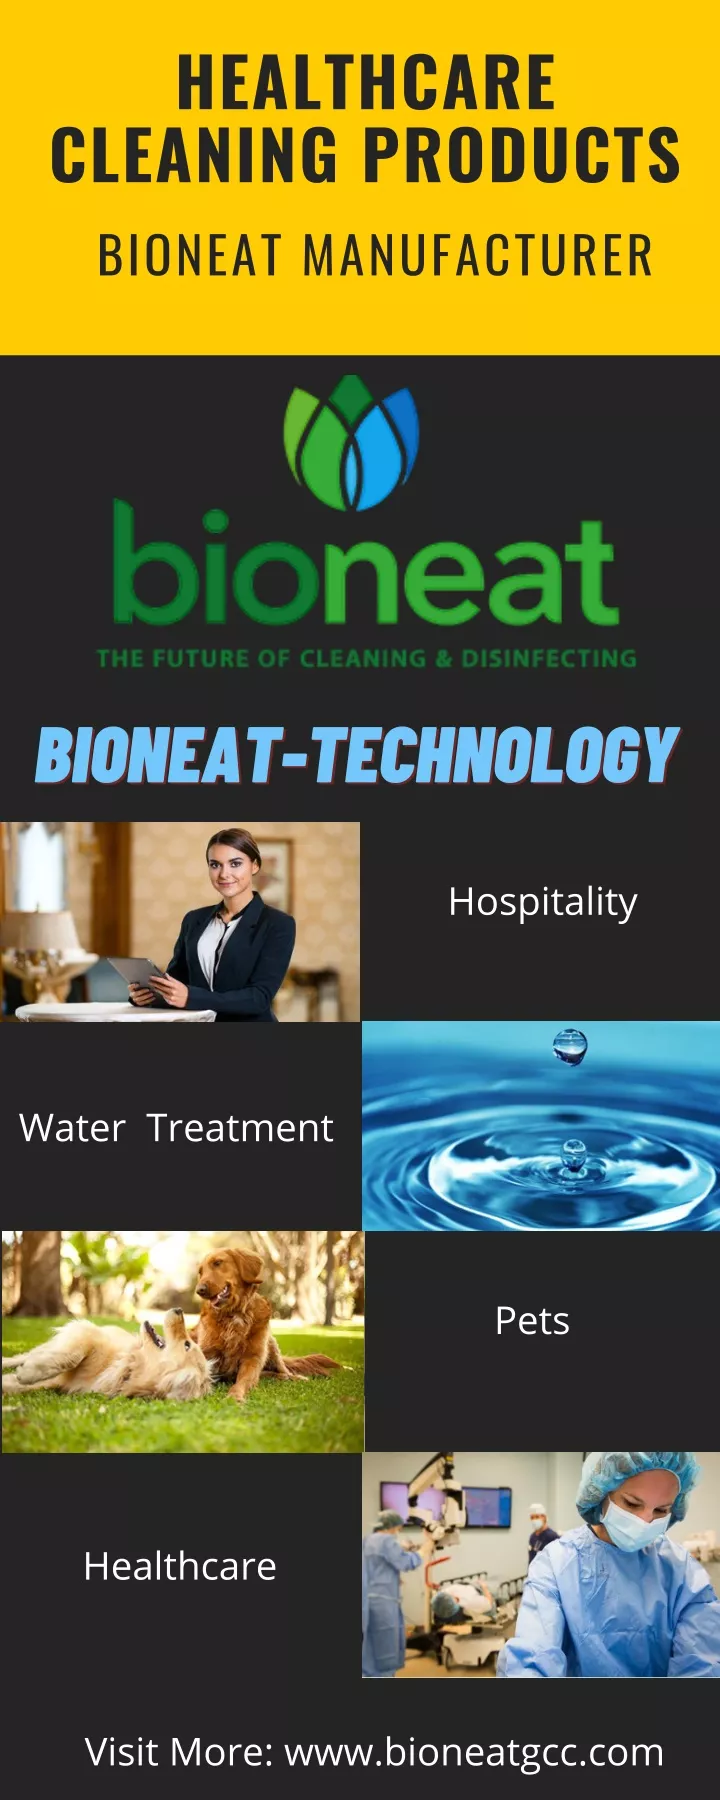 healthcare cleaning products bioneat manufacturer